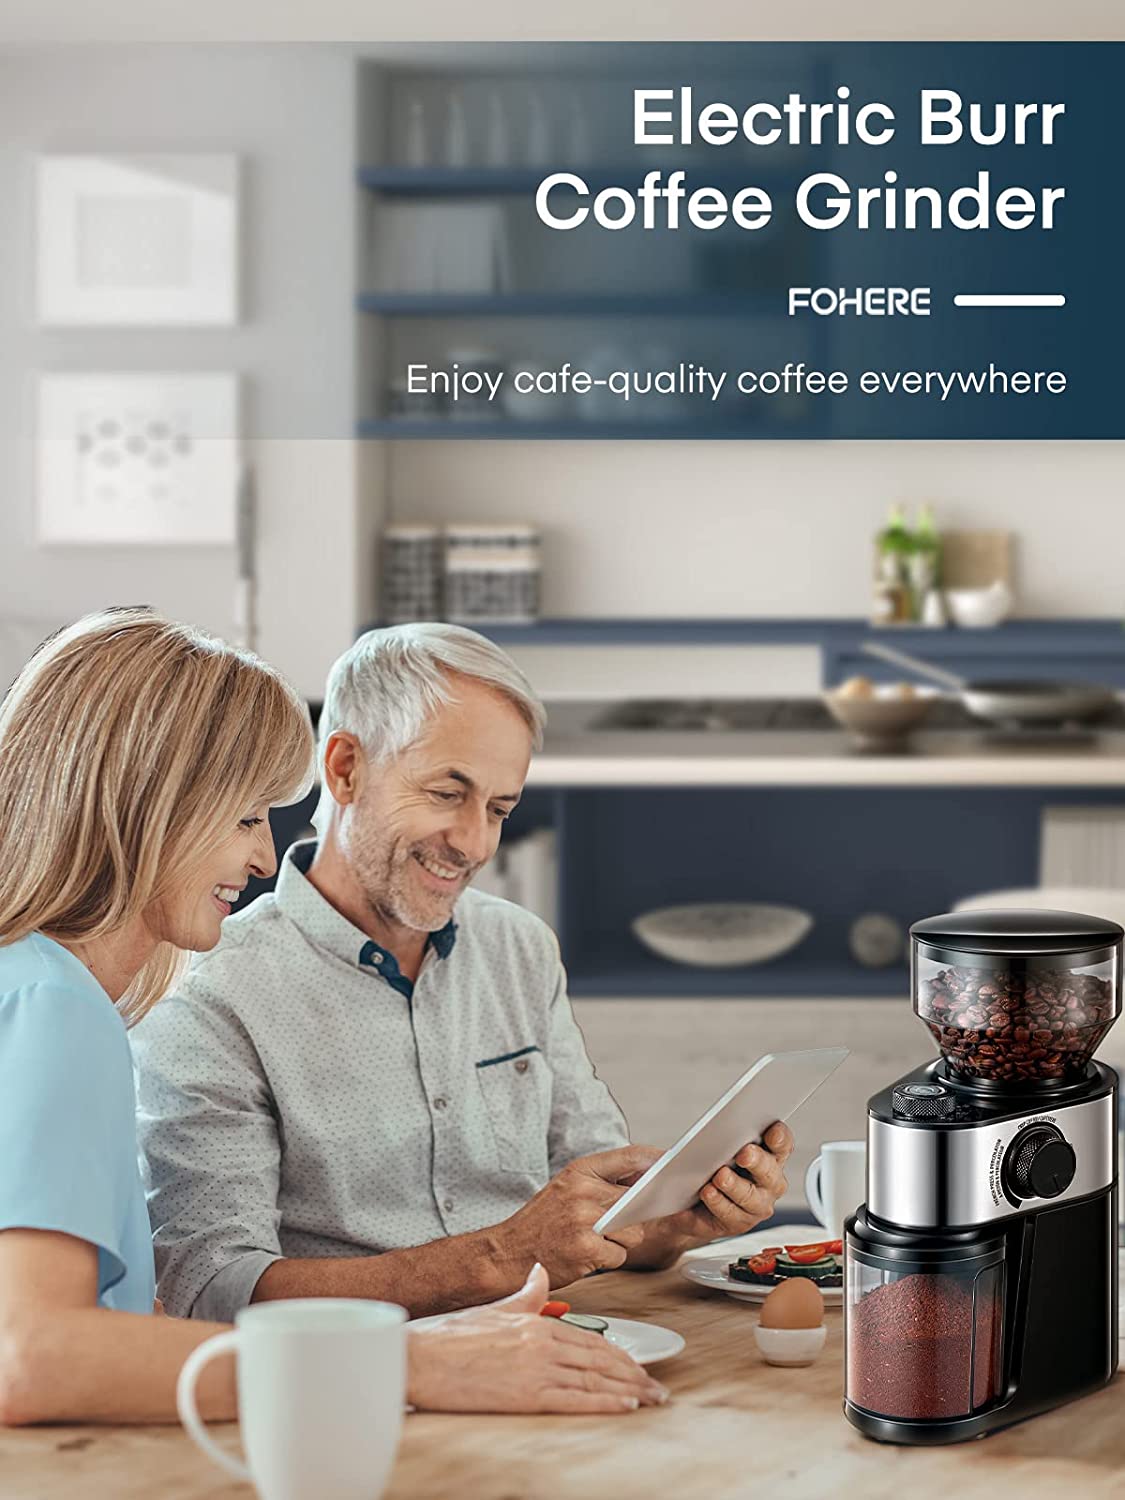 enjoy cafe-quality coffee everywhere, Coffee Grinder Electric, FOHERE Coffee Bean Grinder with 18 Precise Grind Settings, 2-14 Cup for Drip, Percolator, French Press, Espresso and Turkish Coffee Makers, Black